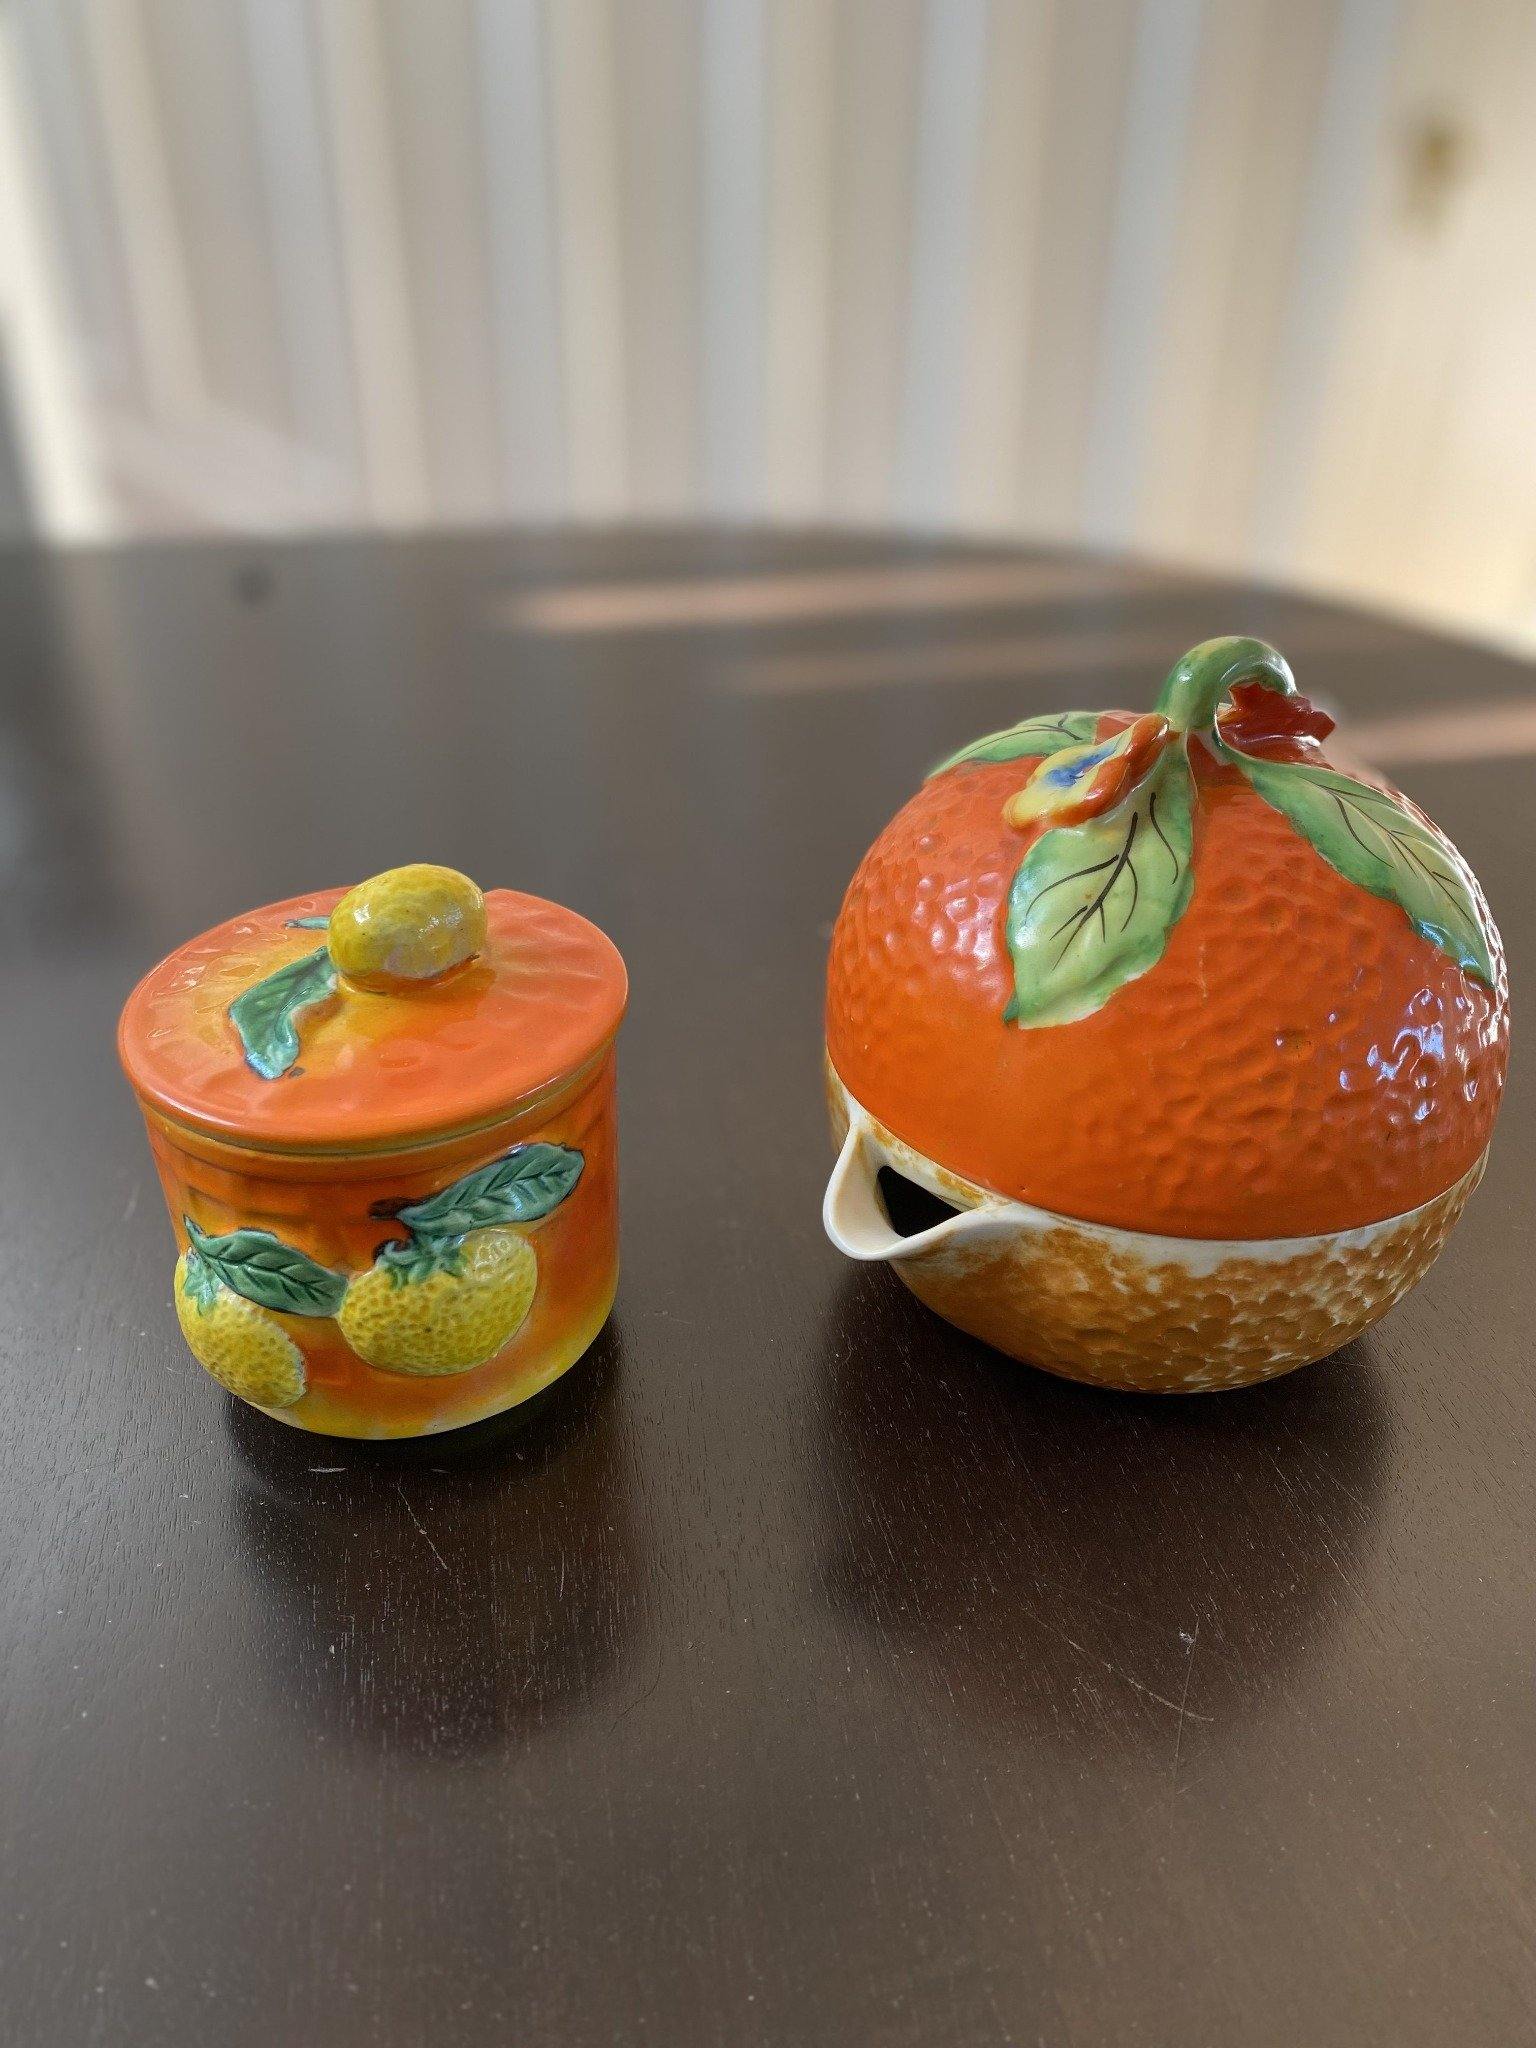 Vintage orange with lemon motif jam and jelly jar with small matching tea pot- Cook Street Vintage